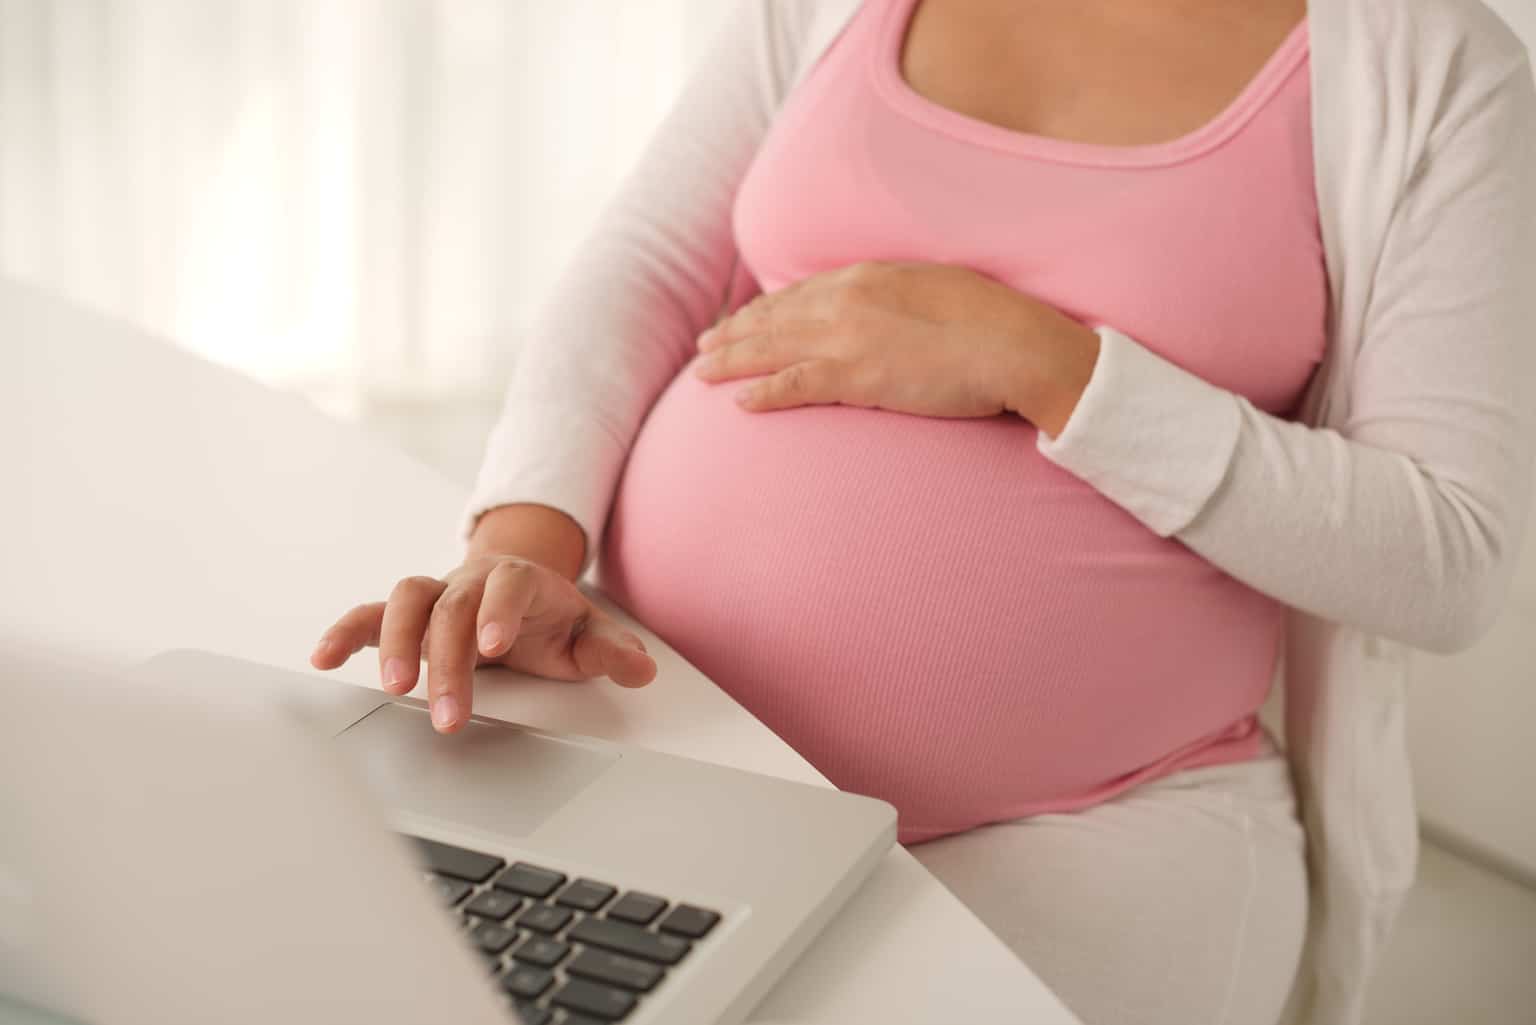 Pregnant woman working on laptop at home, birthing videos, childbirth video, childbirth videos, childbirth education, childbirth education videos